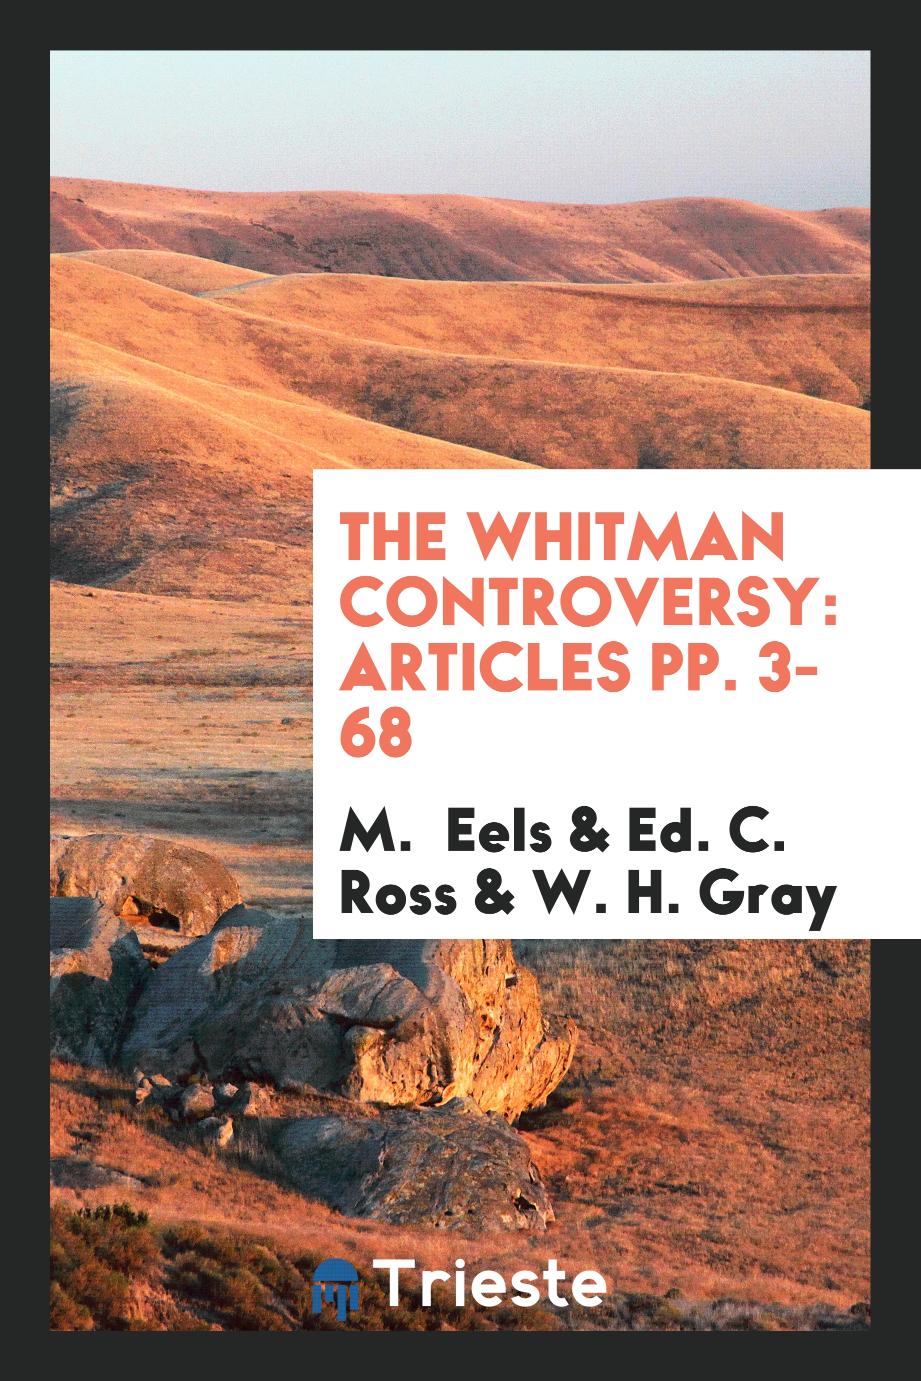 The Whitman Controversy: Articles pp. 3-68